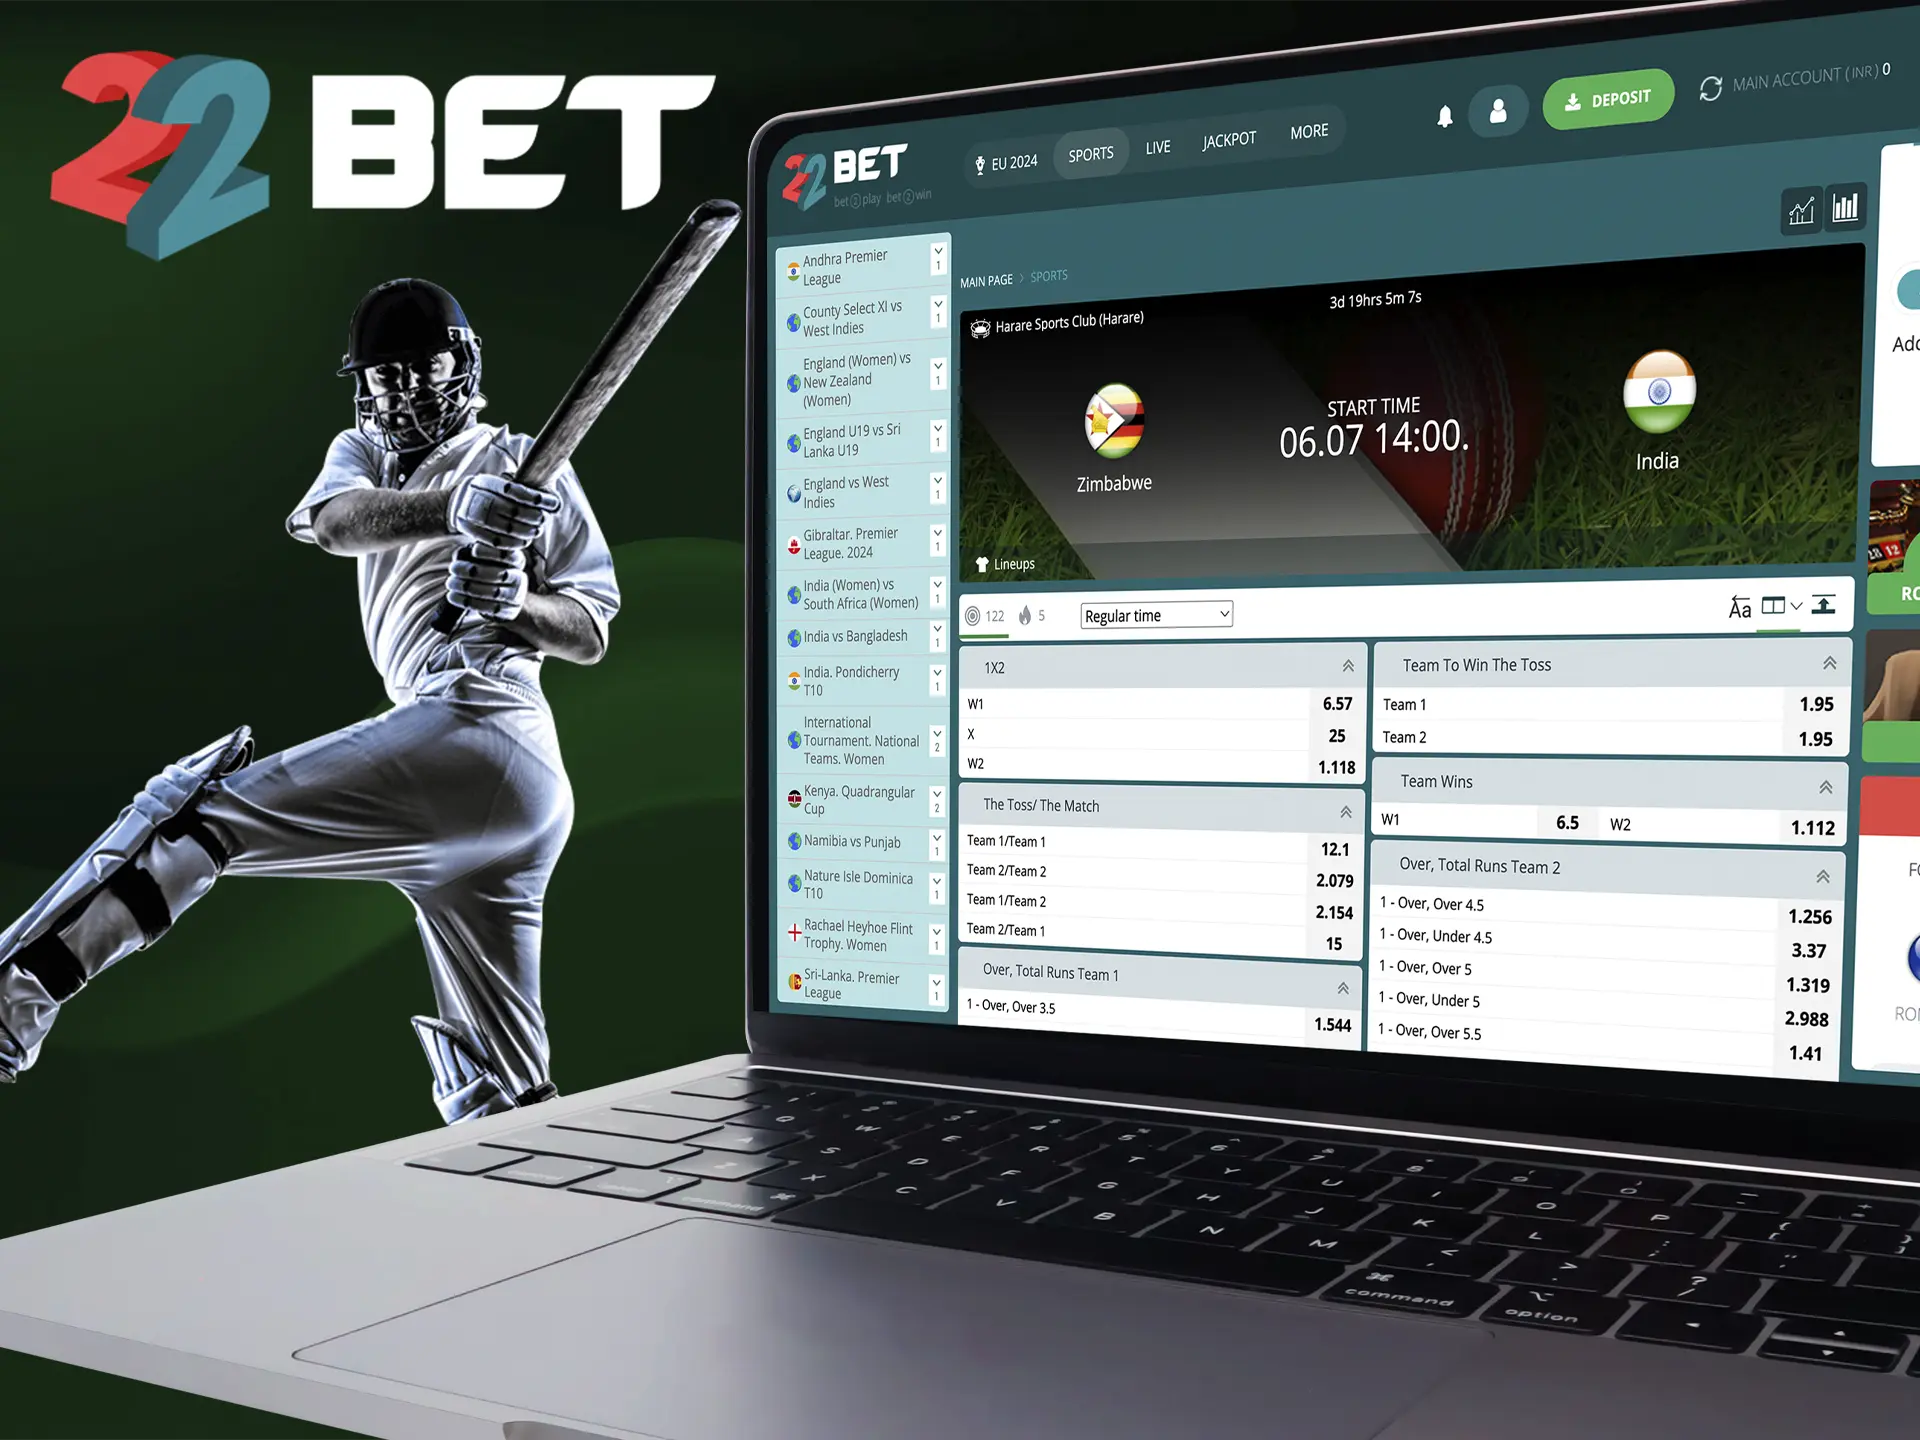 22Bet stands out among other bookmakers with its maximum cricket odds.